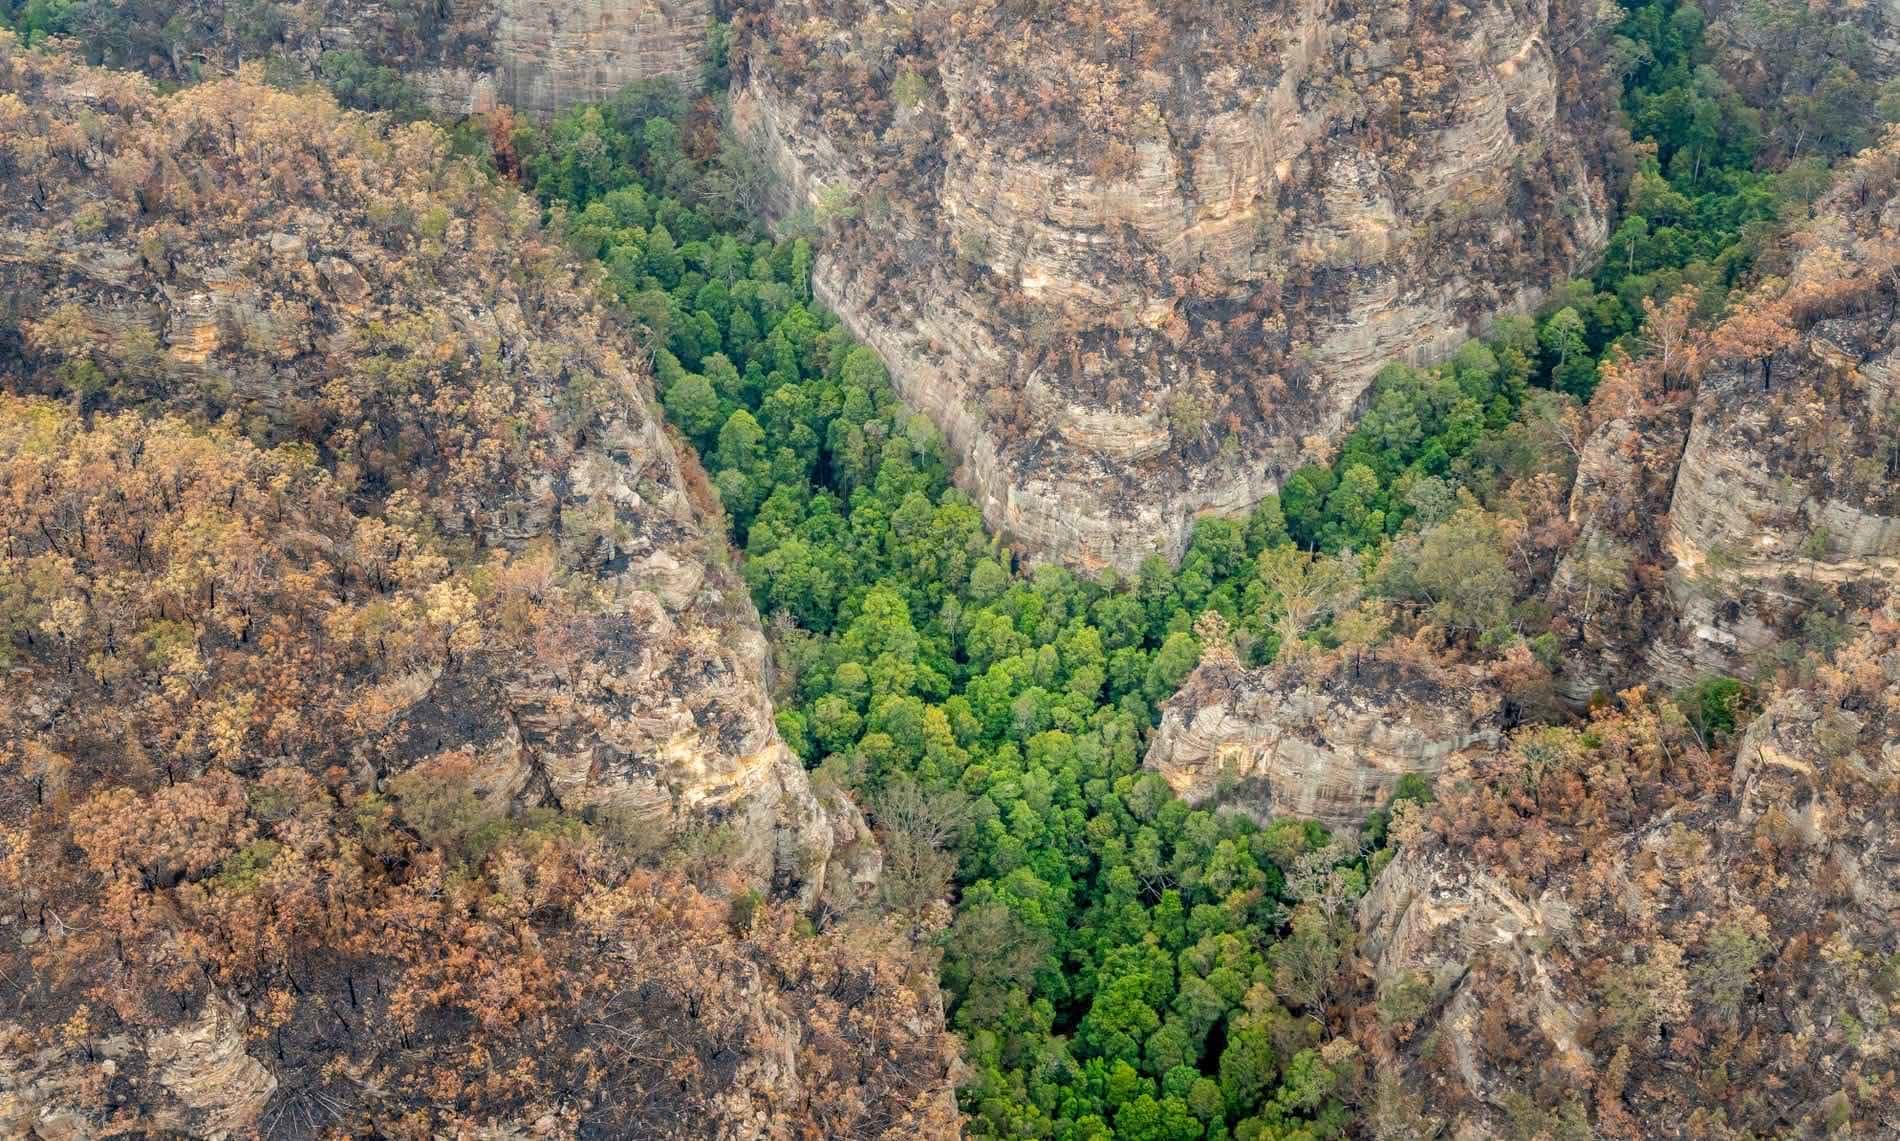 Prehistoric Wollemi Pines Saved From Bushfire, photo by Department of Ag and Primary Industries